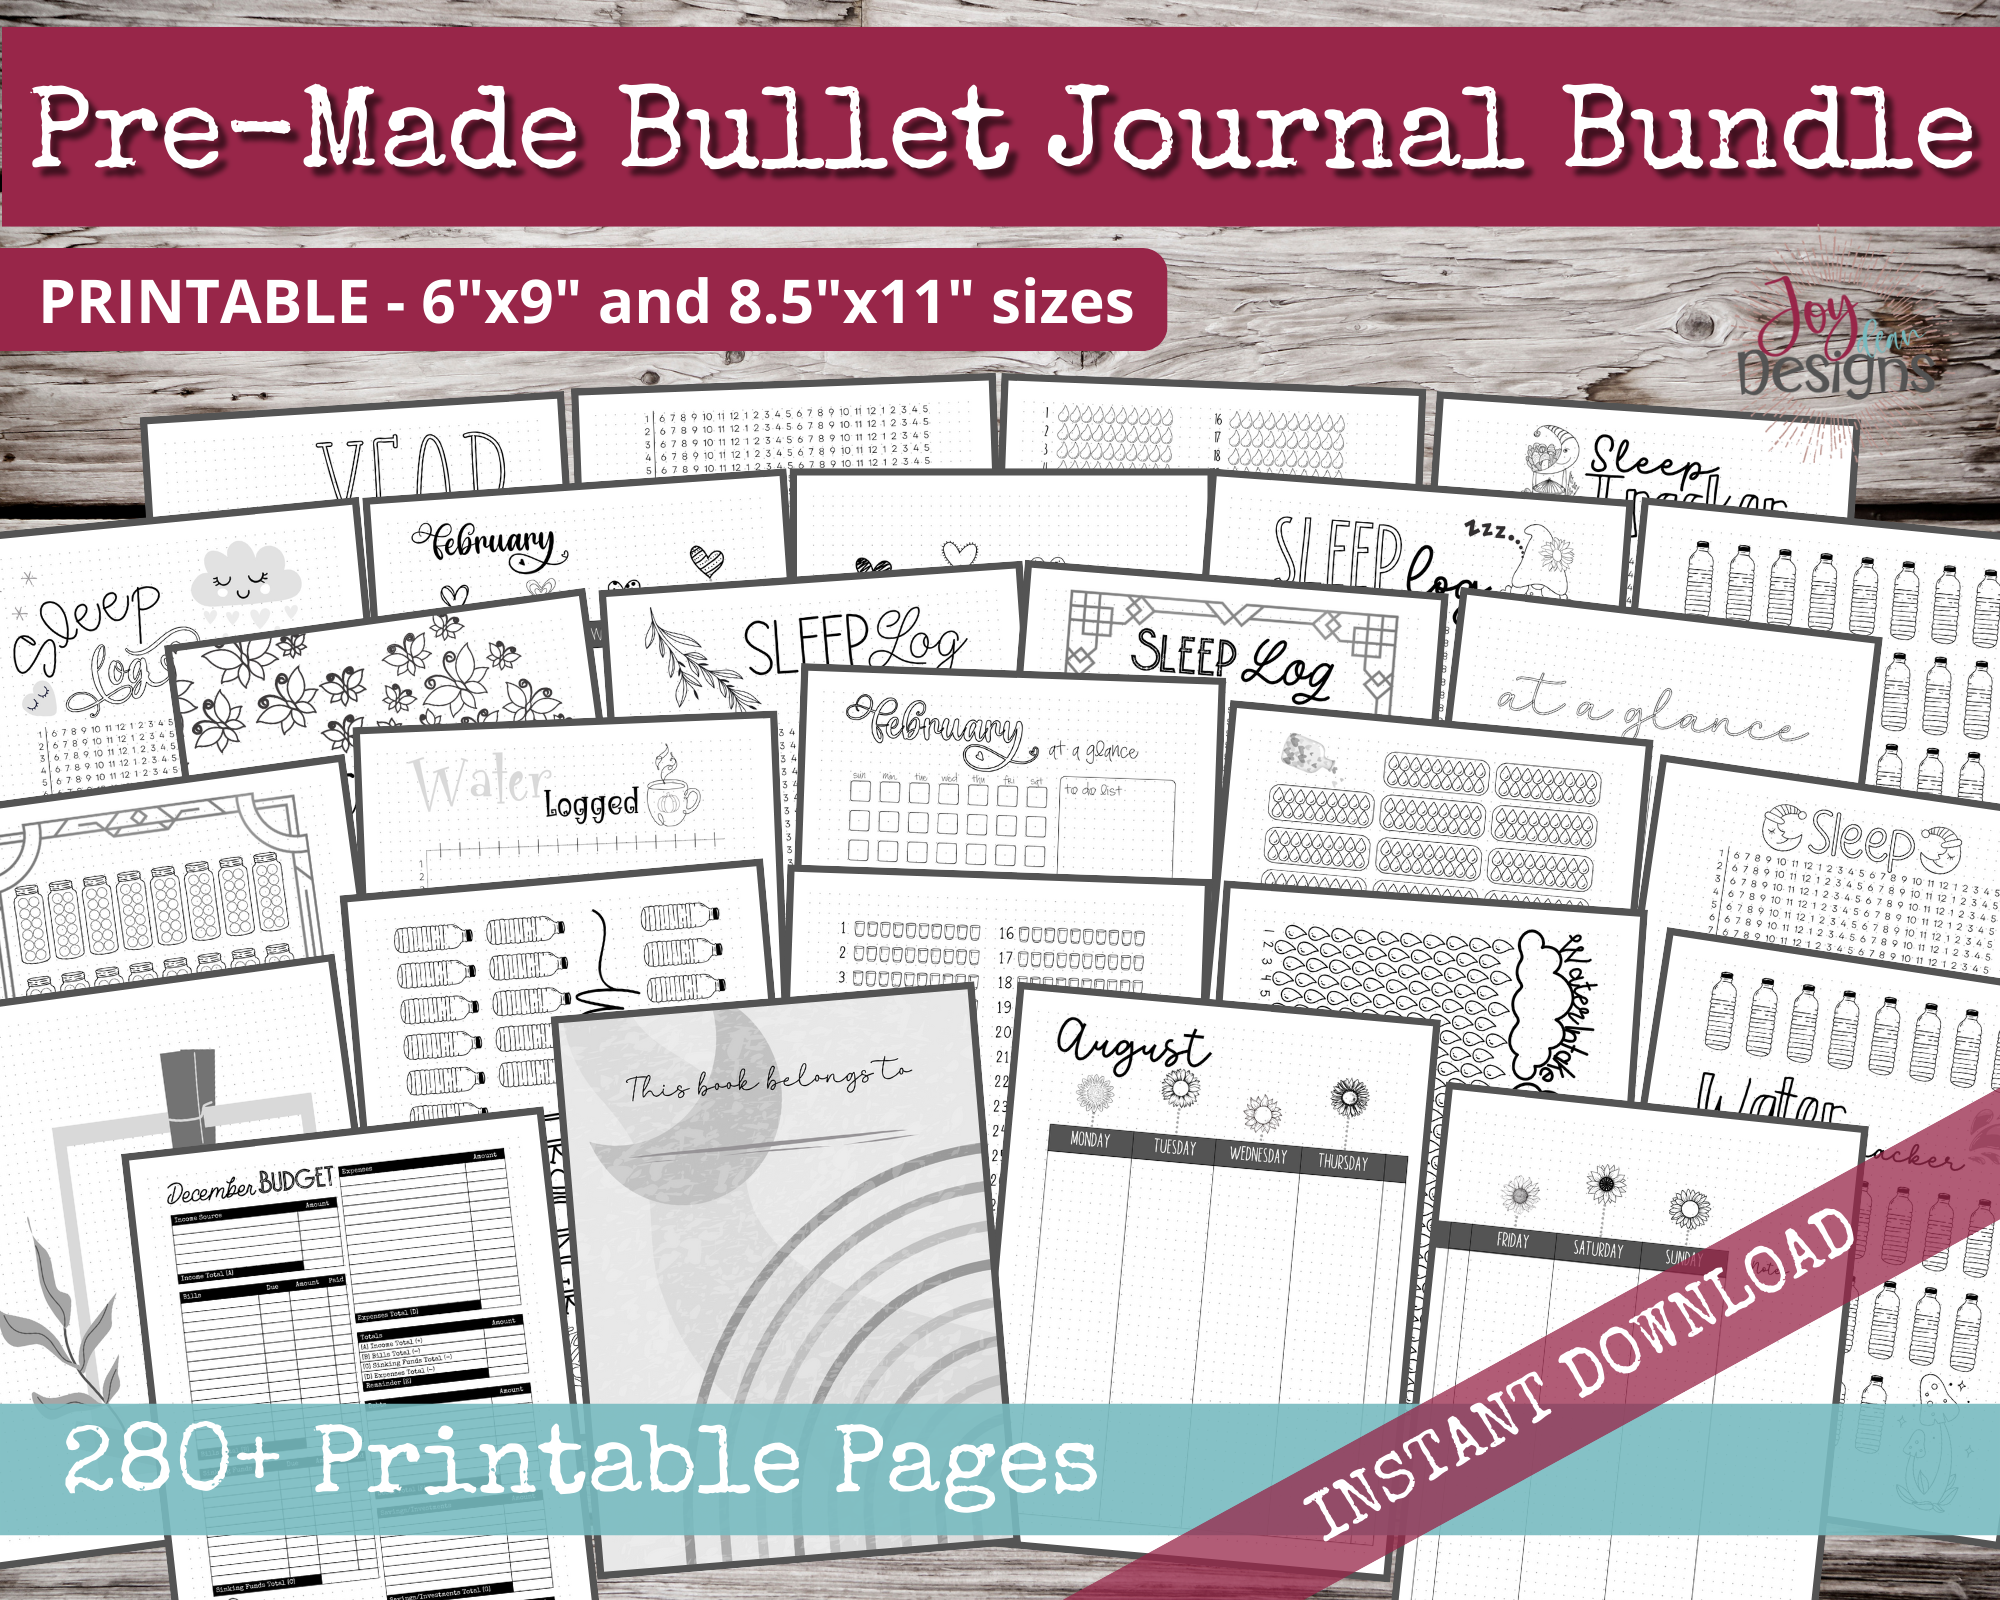 PreMade Bullet Journal Planner Pages, Instant Download Printable Planner, Weekly Bujo Inserts Template PDF 2 Sizes